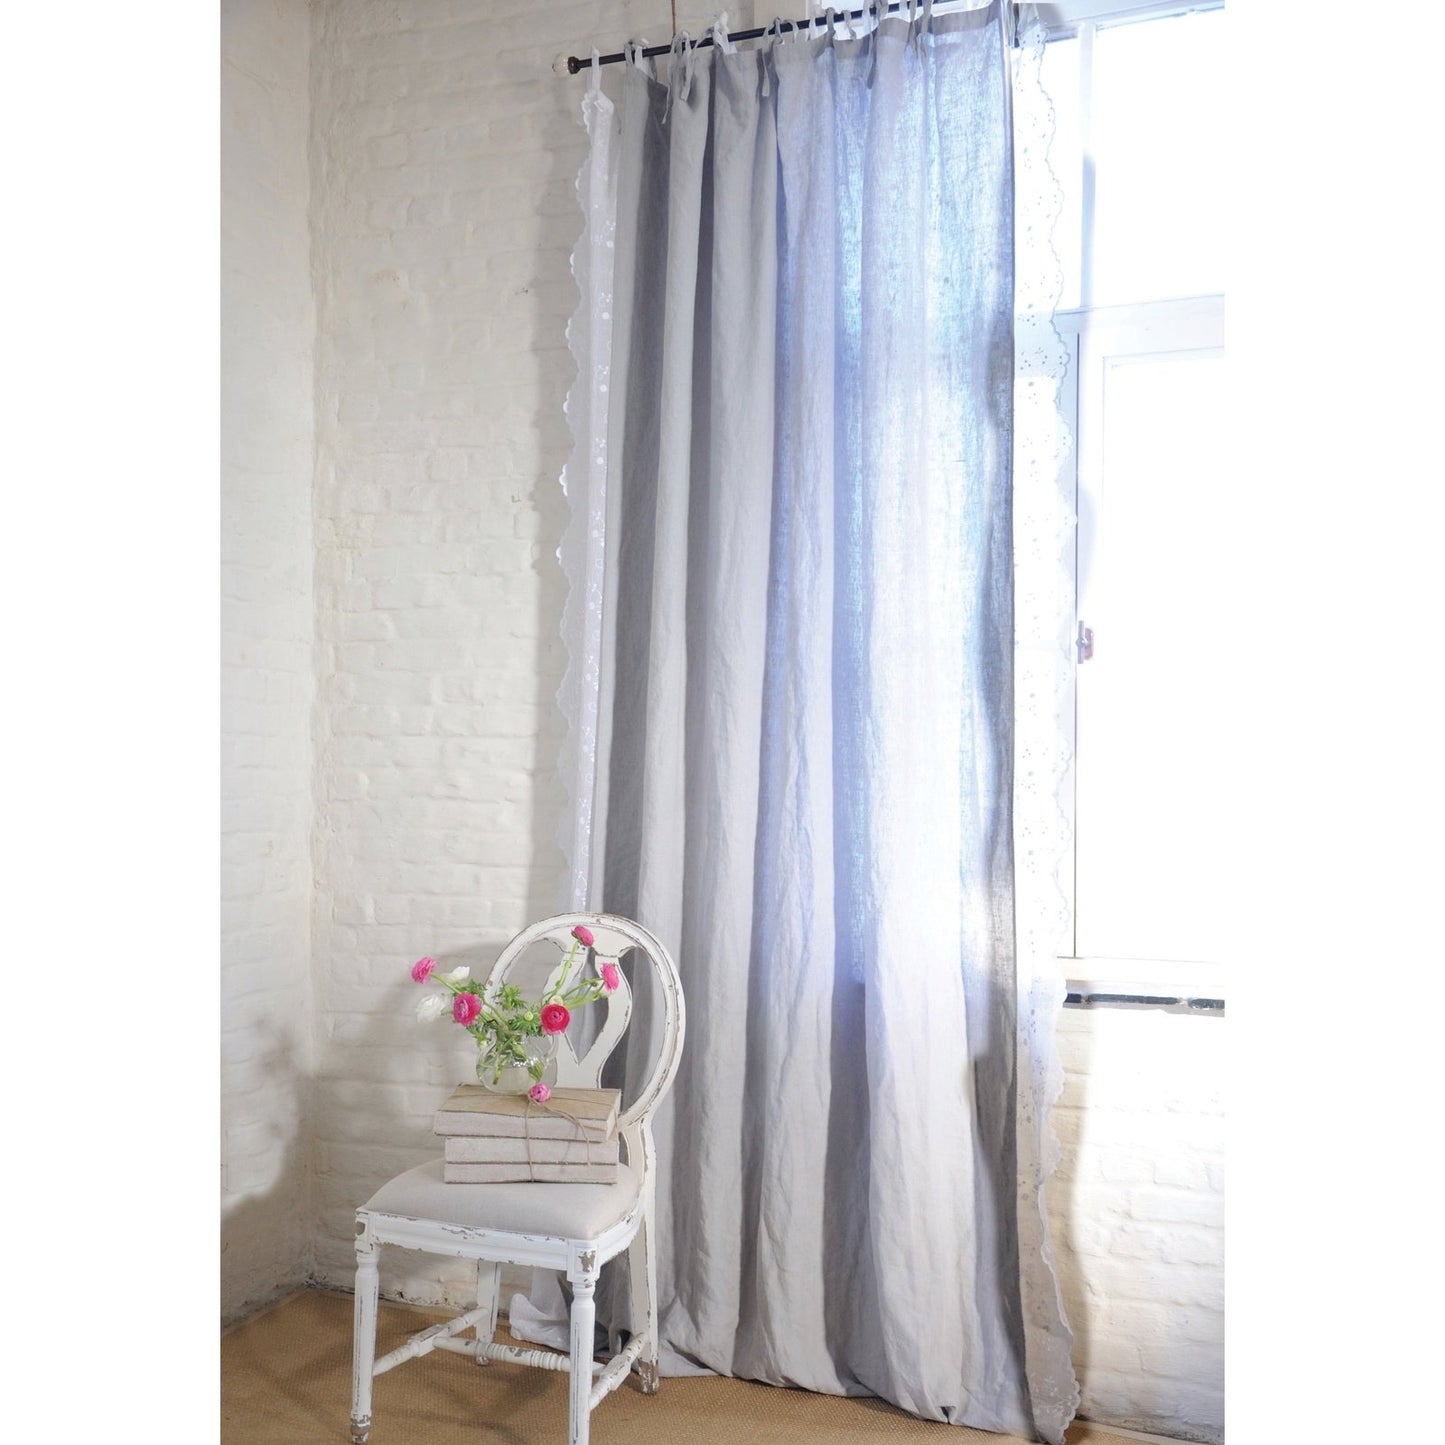 Our Emma linen curtain has become a staple in everyone’s collection. This versatile high-quality washed linen can be endlessly combined. In a timeless way or a more charming way combined with our lace curtains. This nice size 160x280cm curtain is machine washable and has 0% shrinkage!